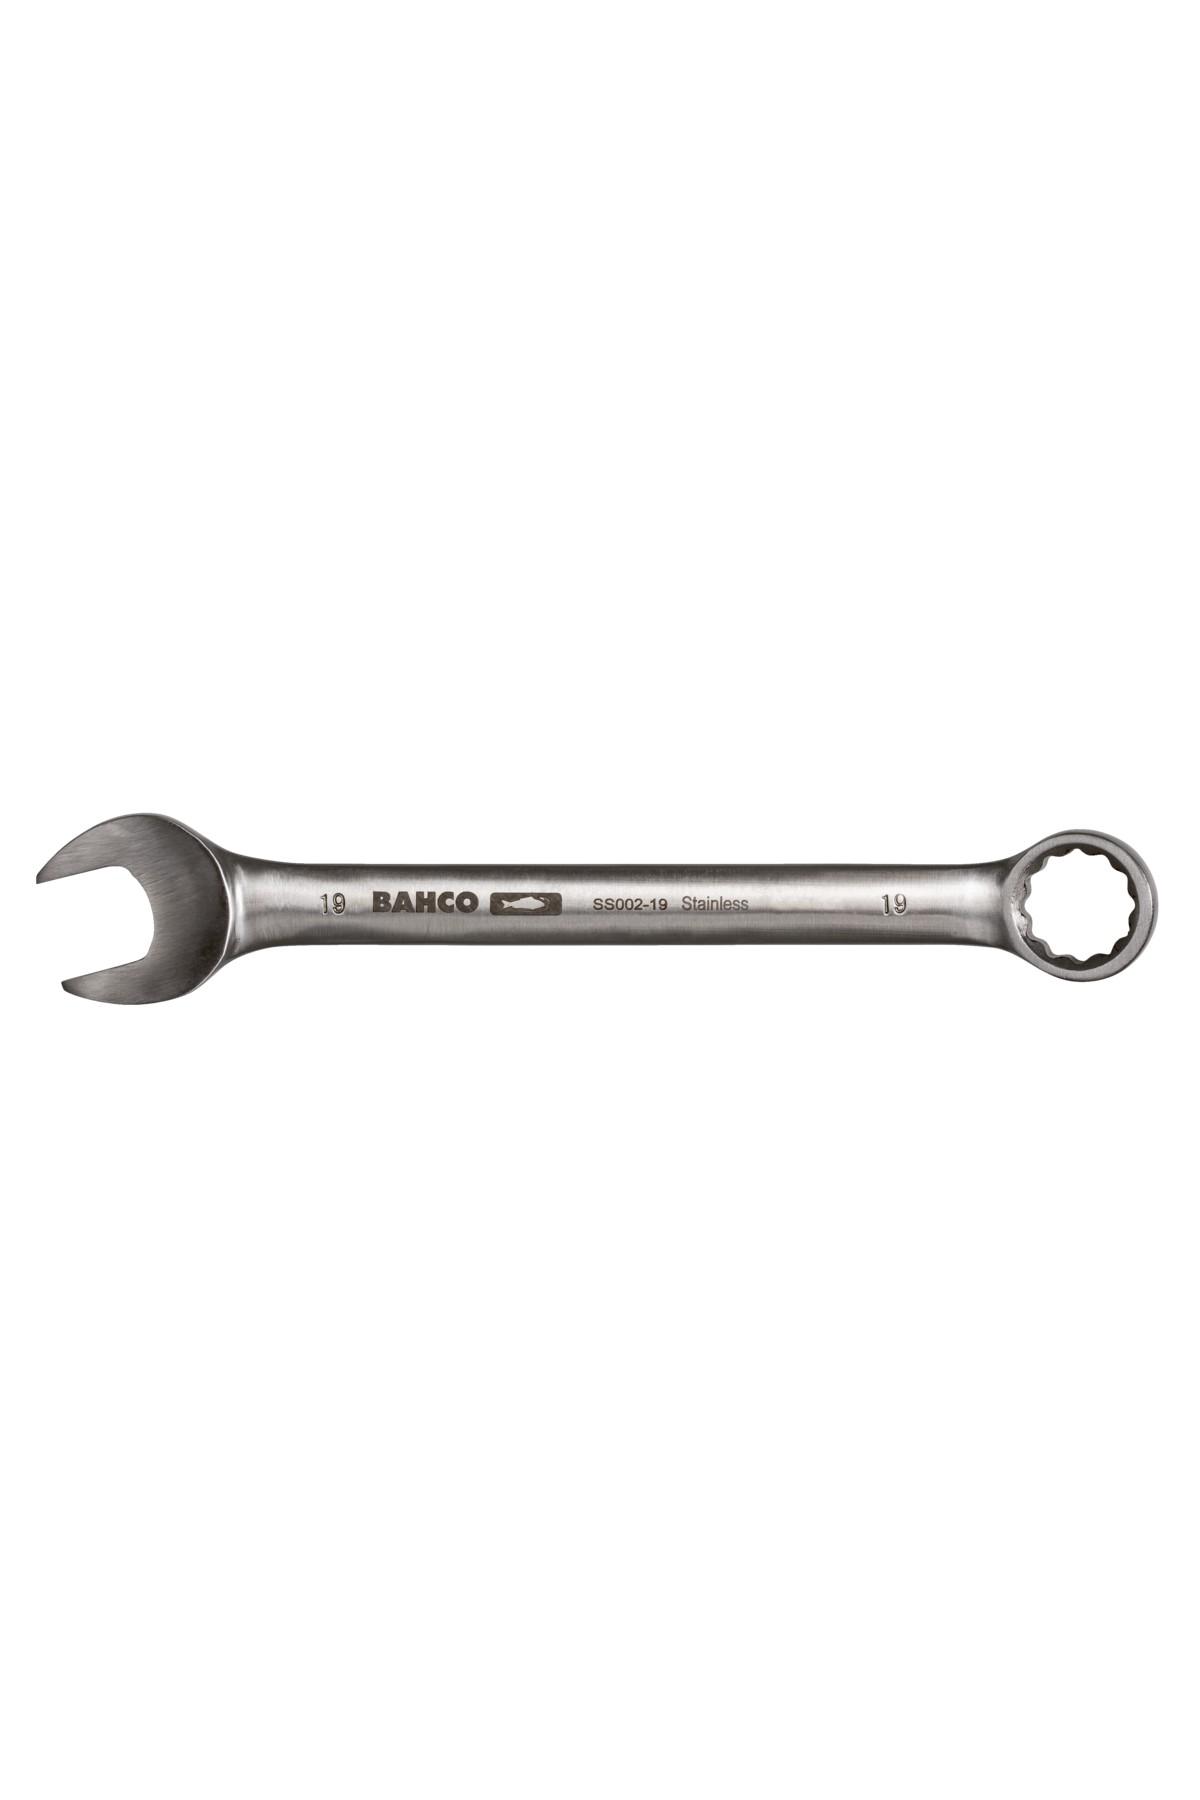 Ring spanner stainless steel SS003 11/16